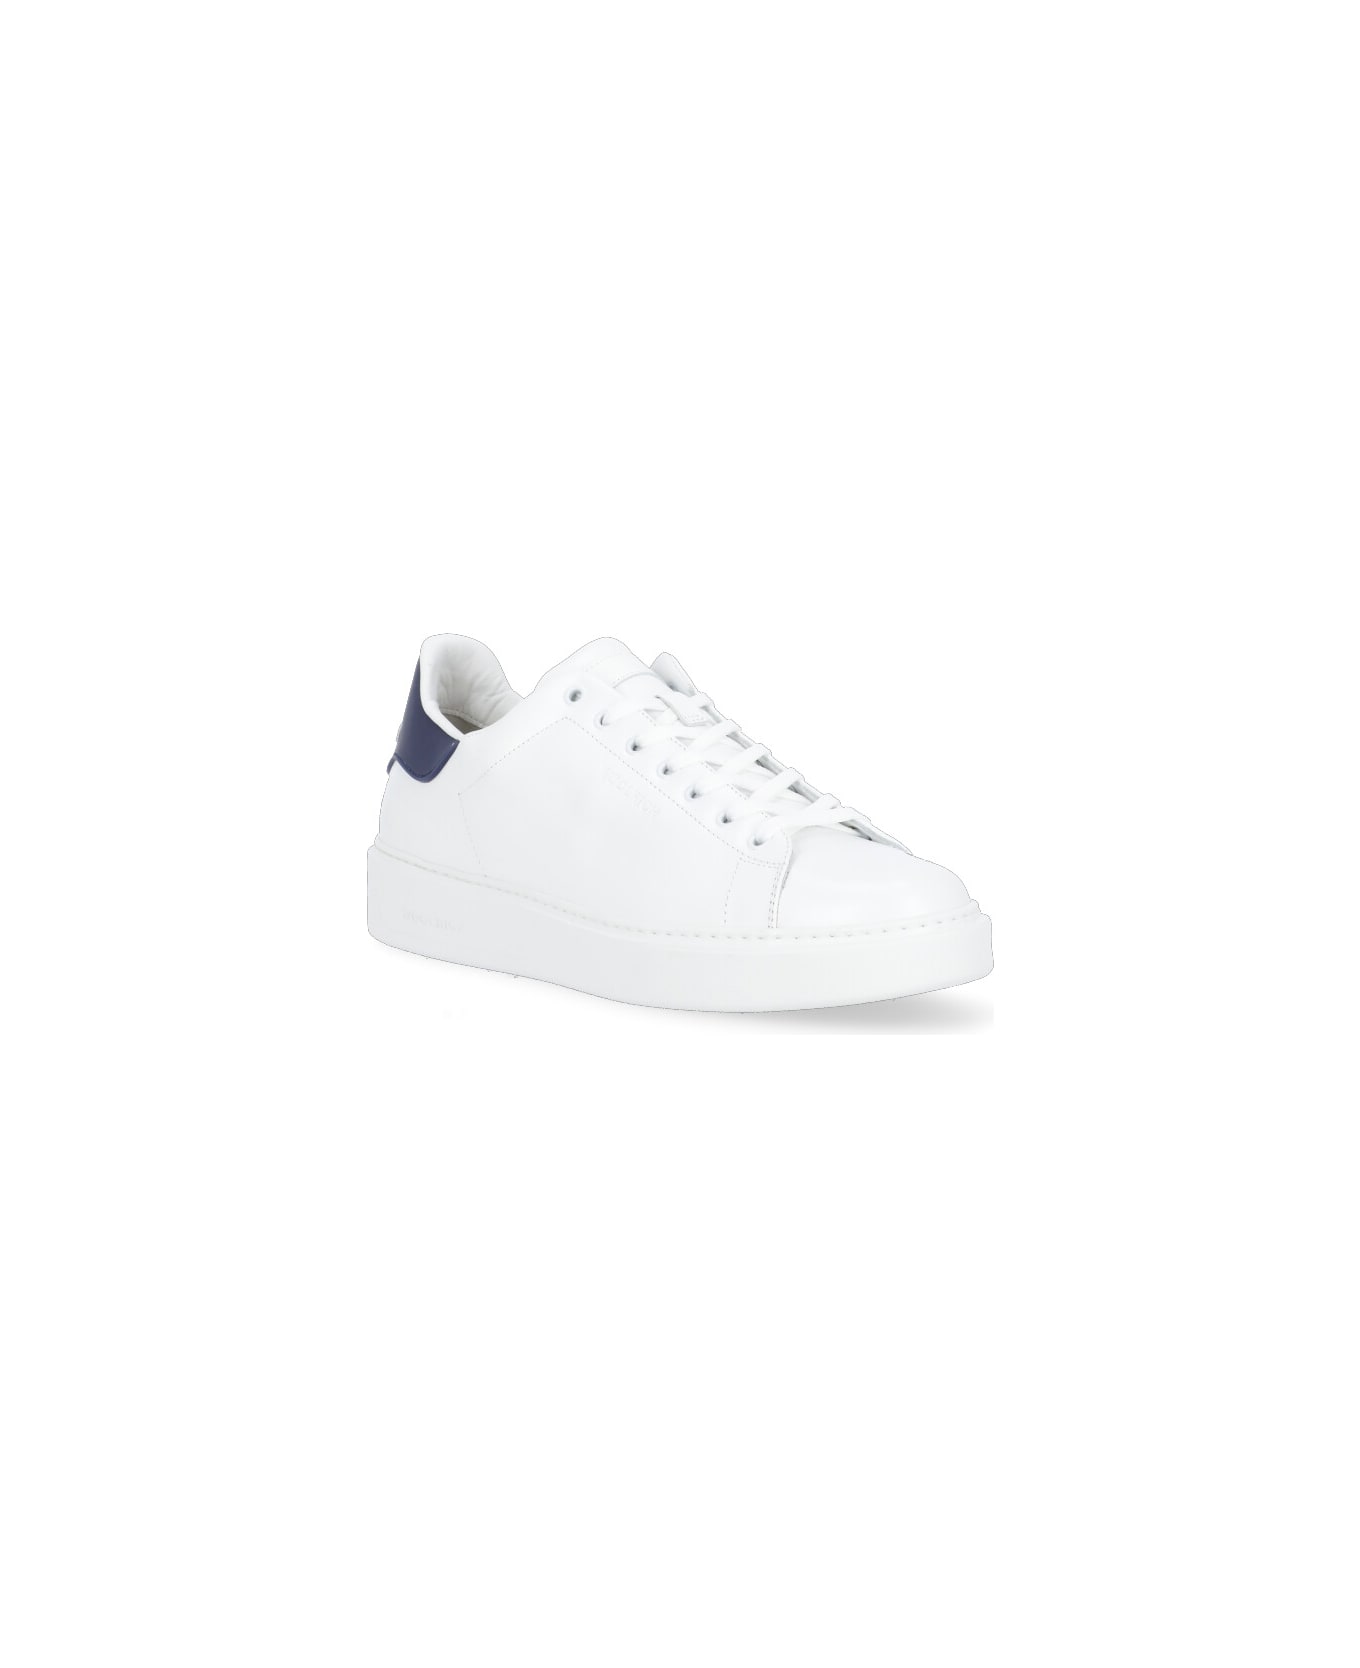 Woolrich Leather Sneakers - Calf White Pvc Blue